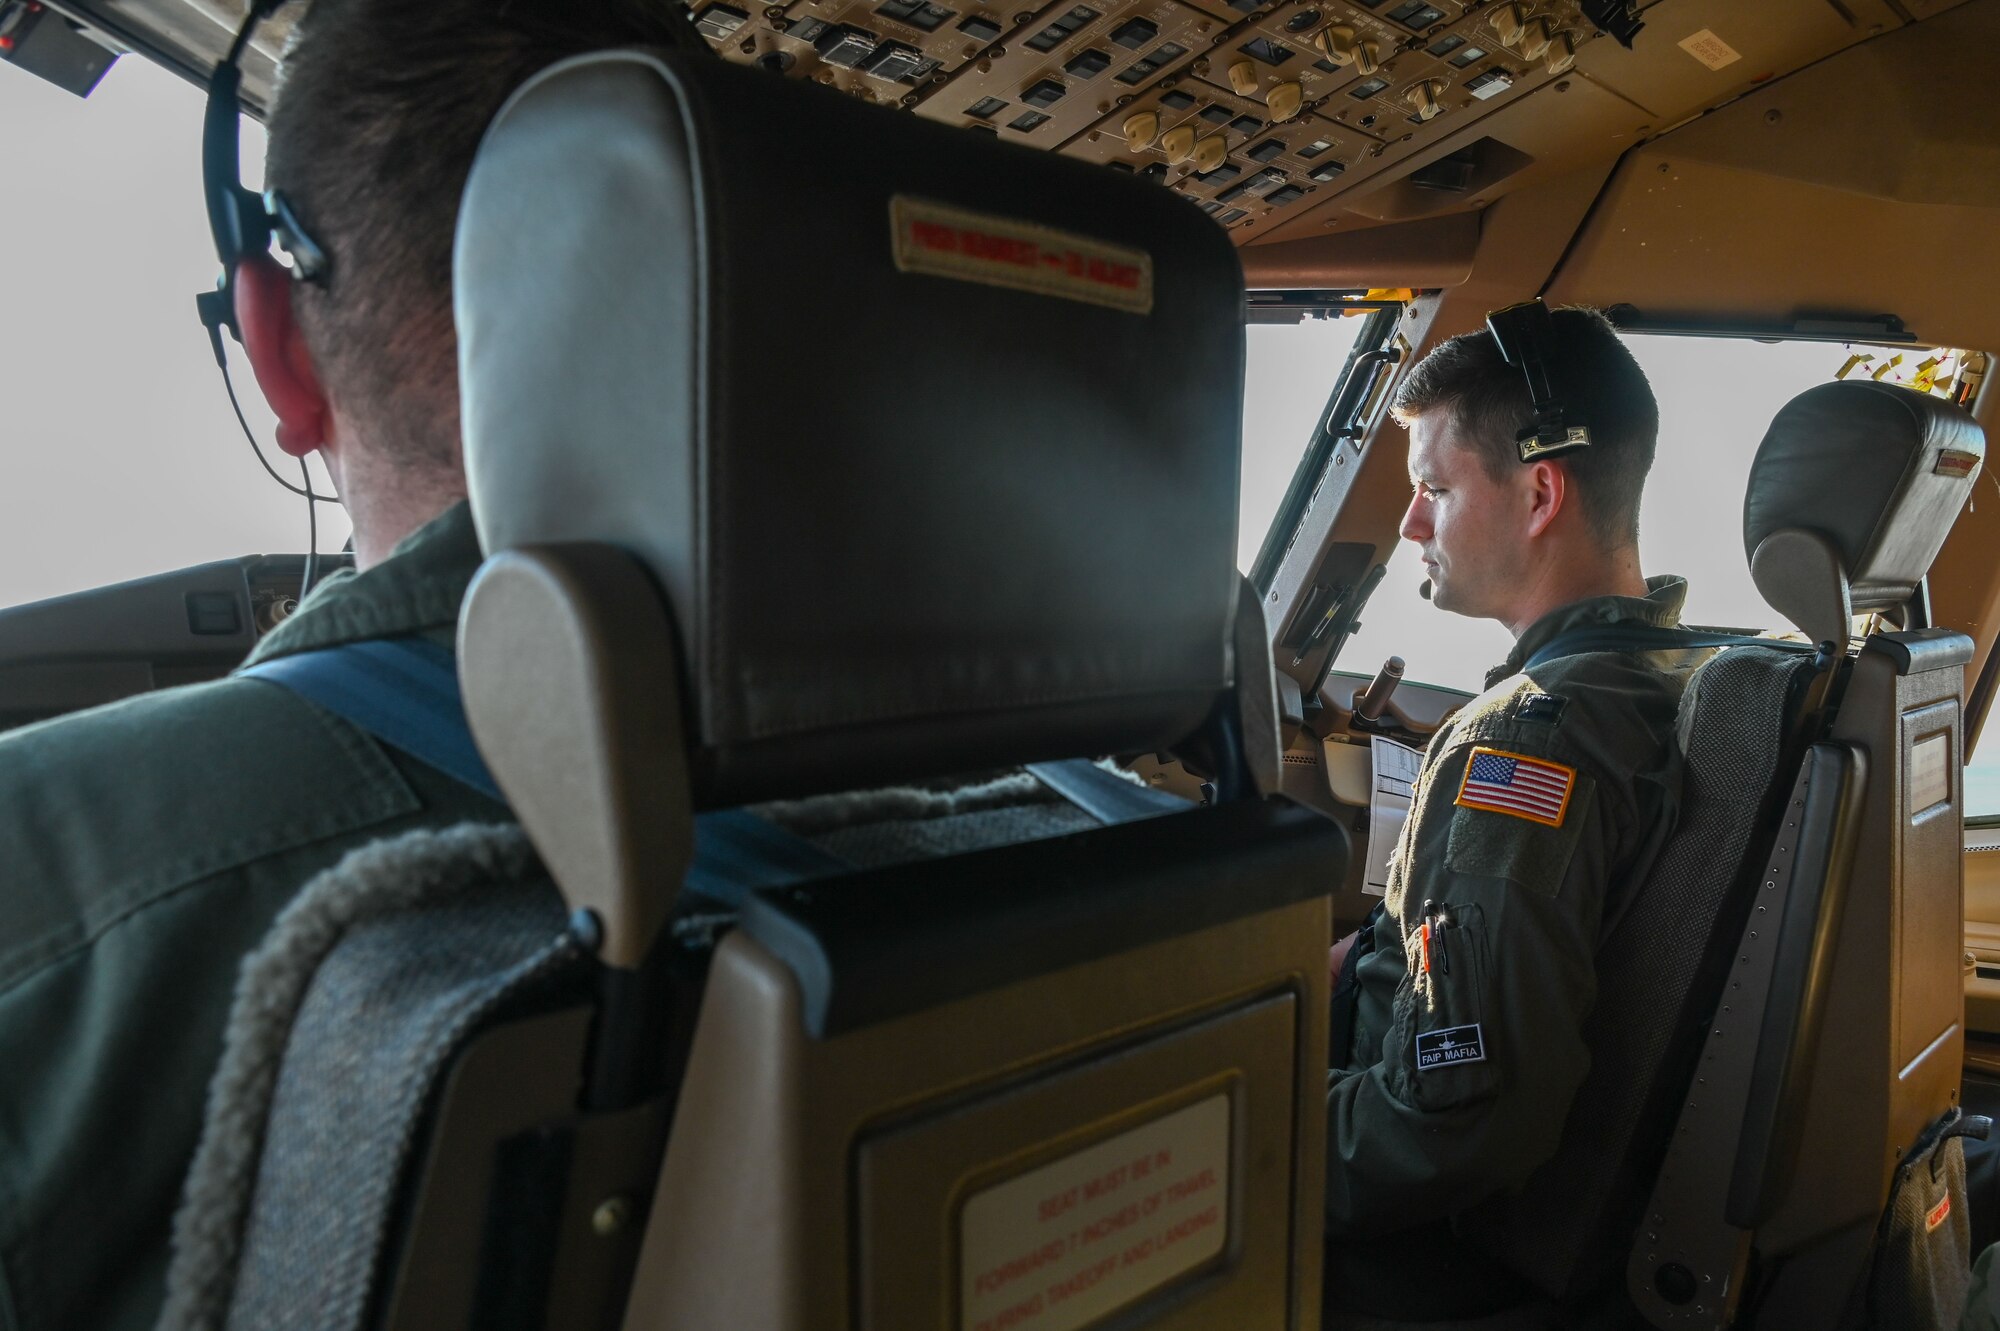 U.S. Air Force Capt. Brendan Bailey, 48th Flying Training Squadron instructor pilot, observes a “touch-and-go” procedure in the KC-46 Pegasus at Altus Air Force Base, Oklahoma, Nov. 16, 2022. Bailey was able to learn about the KC-46 capabilities including takeoff and landing and air fueling. (U.S. Air Force photo by Senior Airman Kayla Christenson)